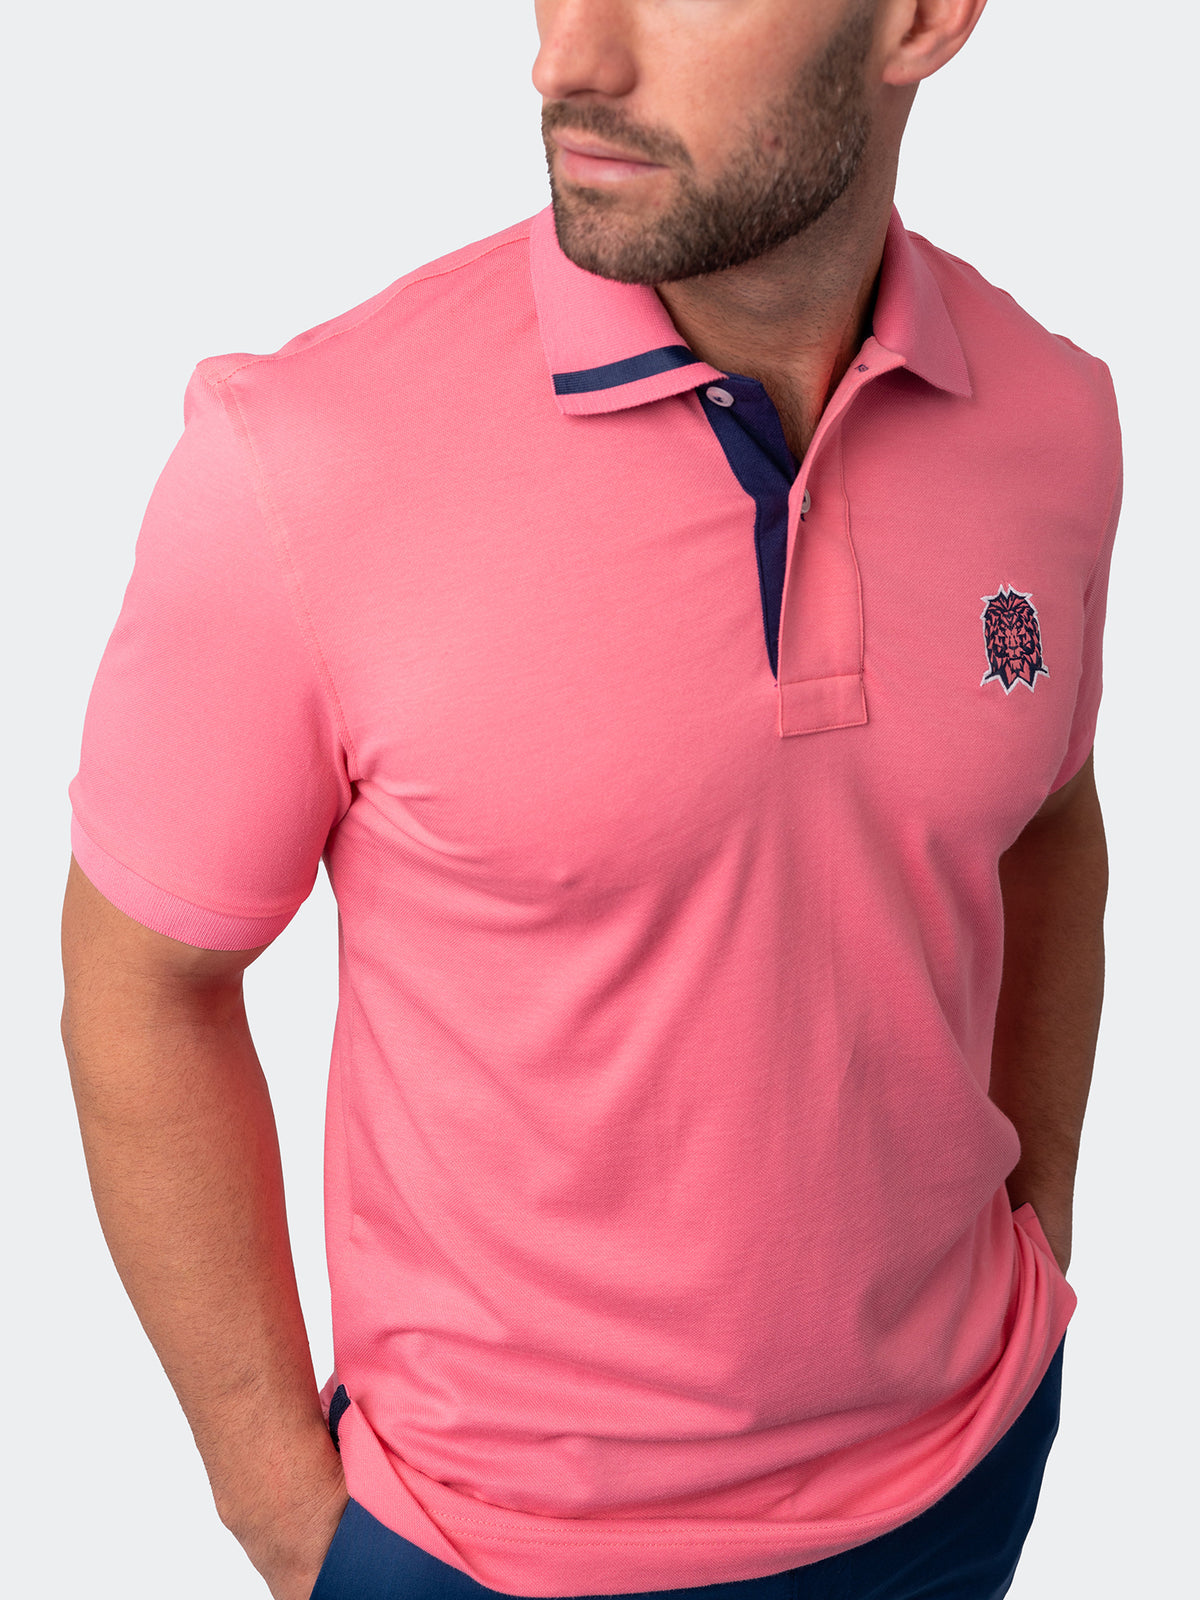 Maceoo Short Sleeve Polo Shirt Mozart Solid Tip Pink